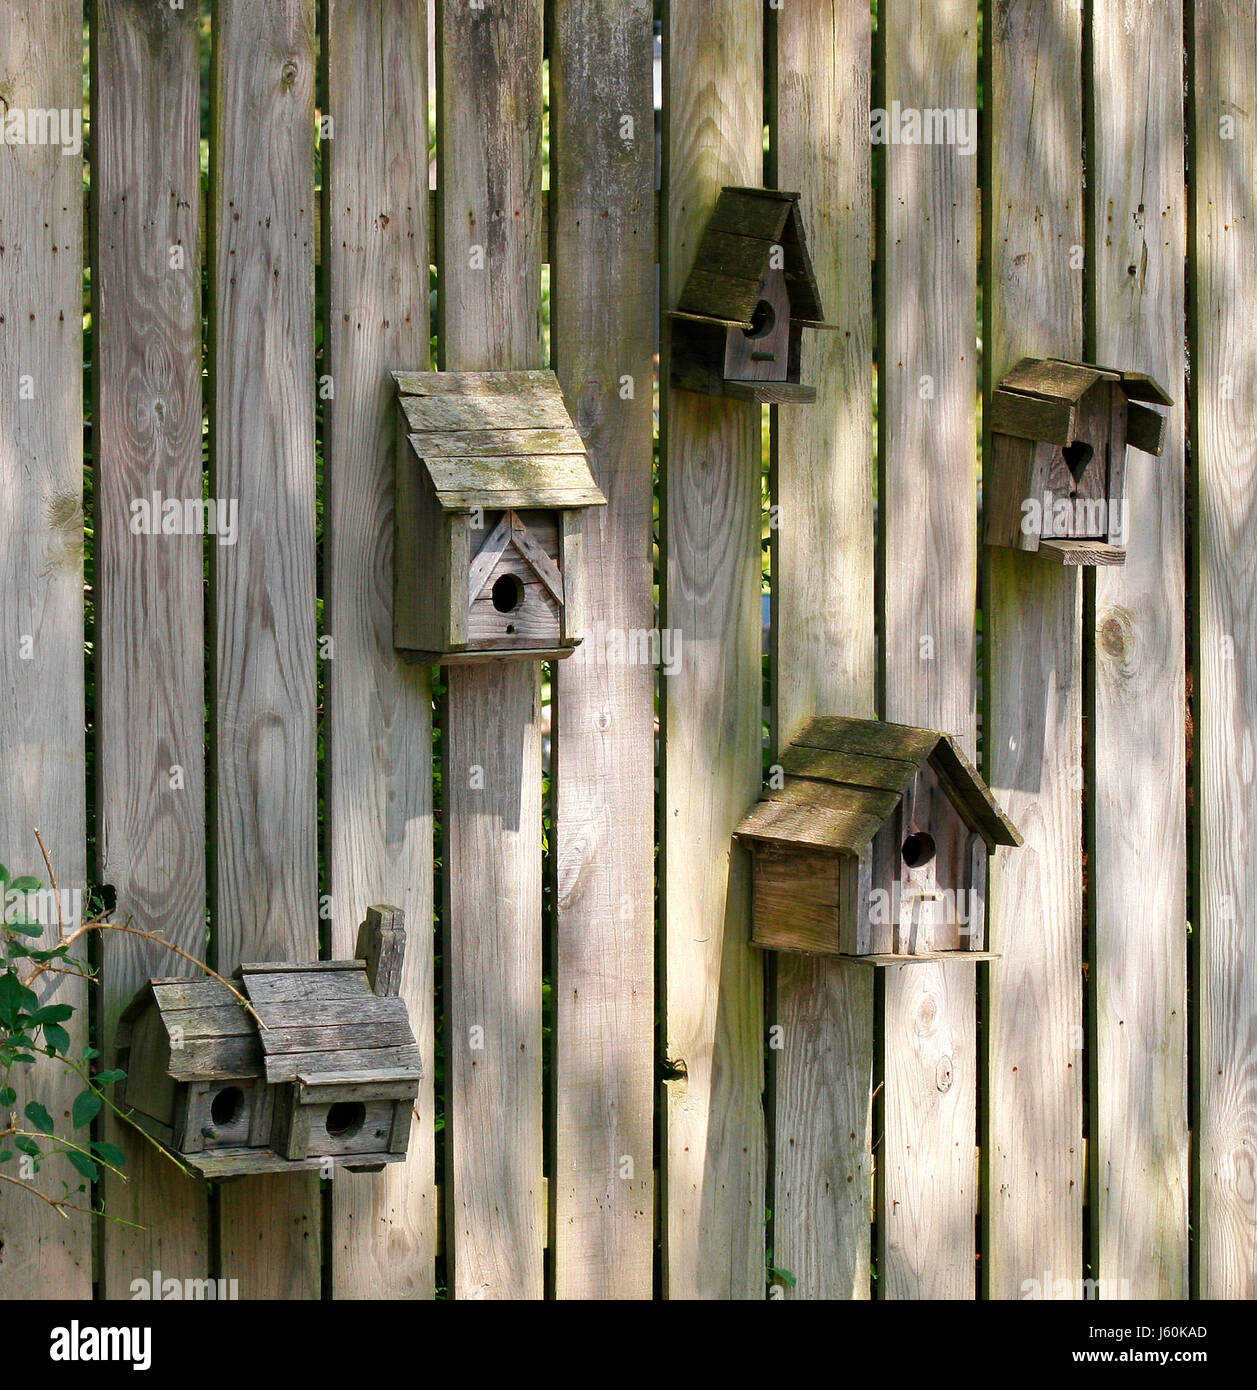 bird hobby crafts wooden outdoors fence house building birds hobby outside Stock Photo